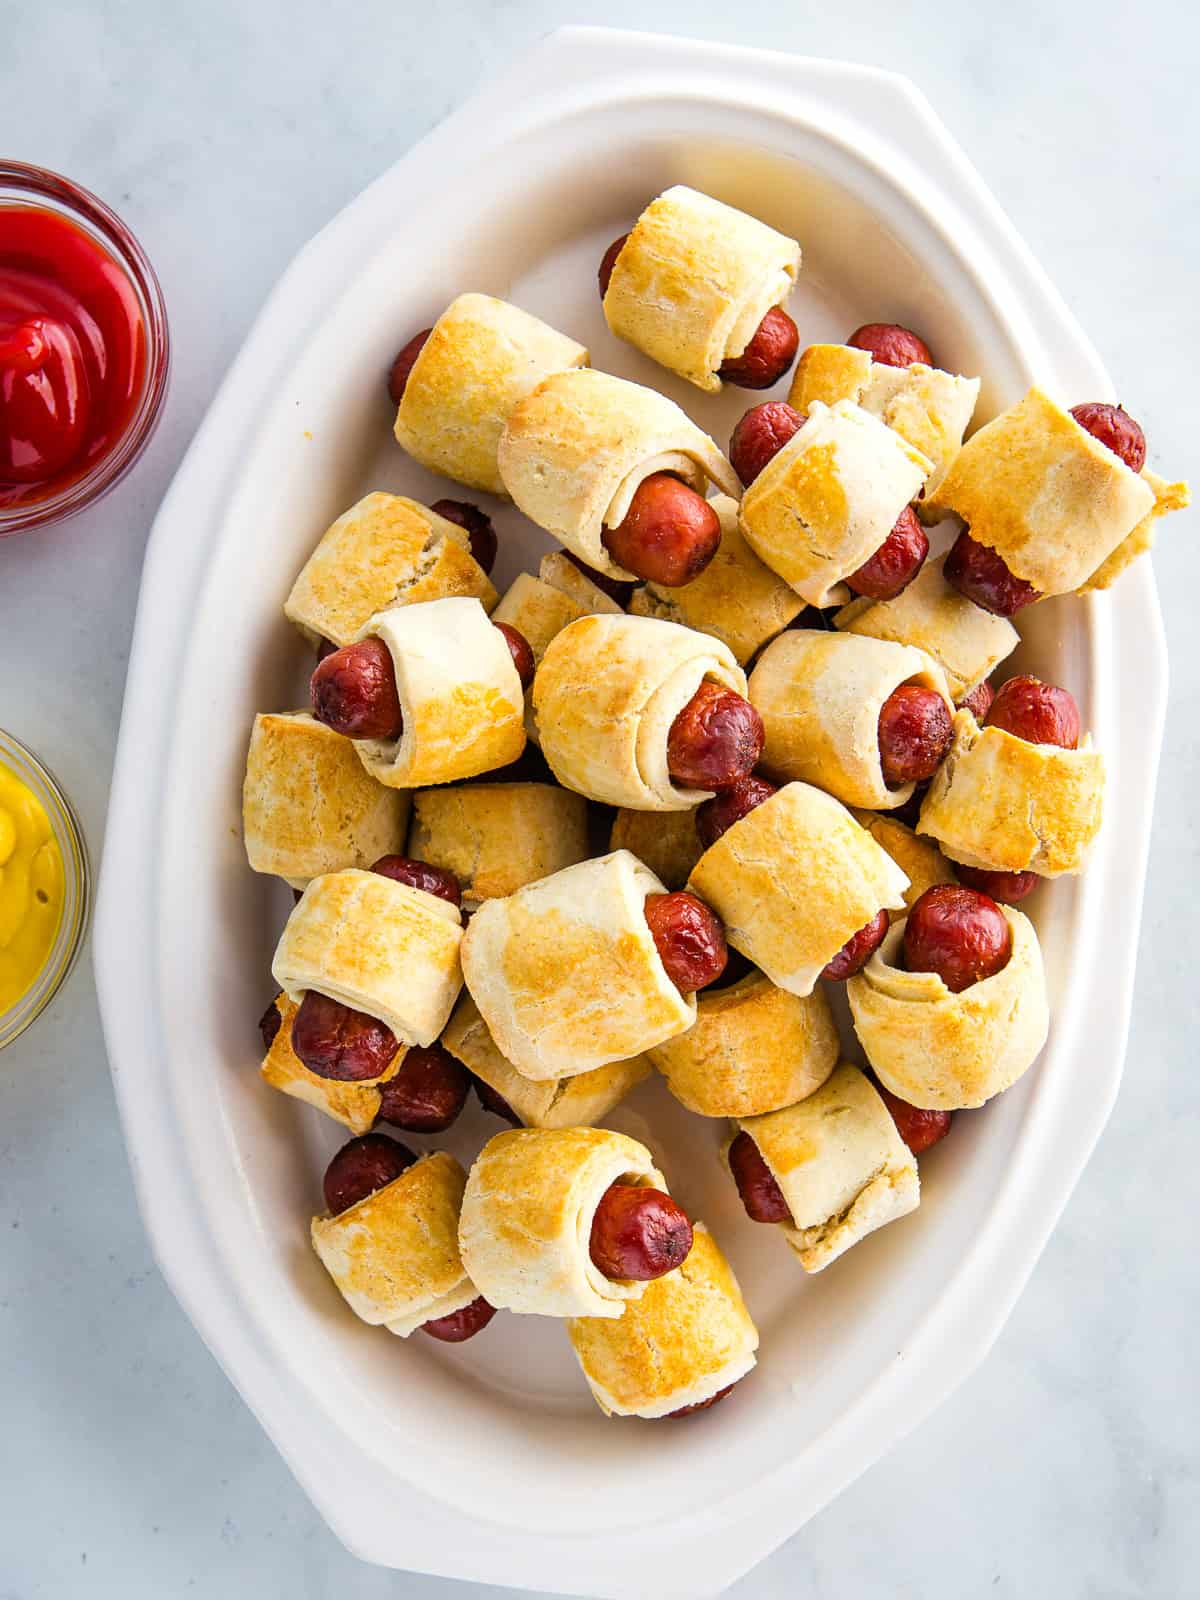 Gluten-free pigs in a blanket on a white platter with ketchup and mustard in small bowls off to the side.